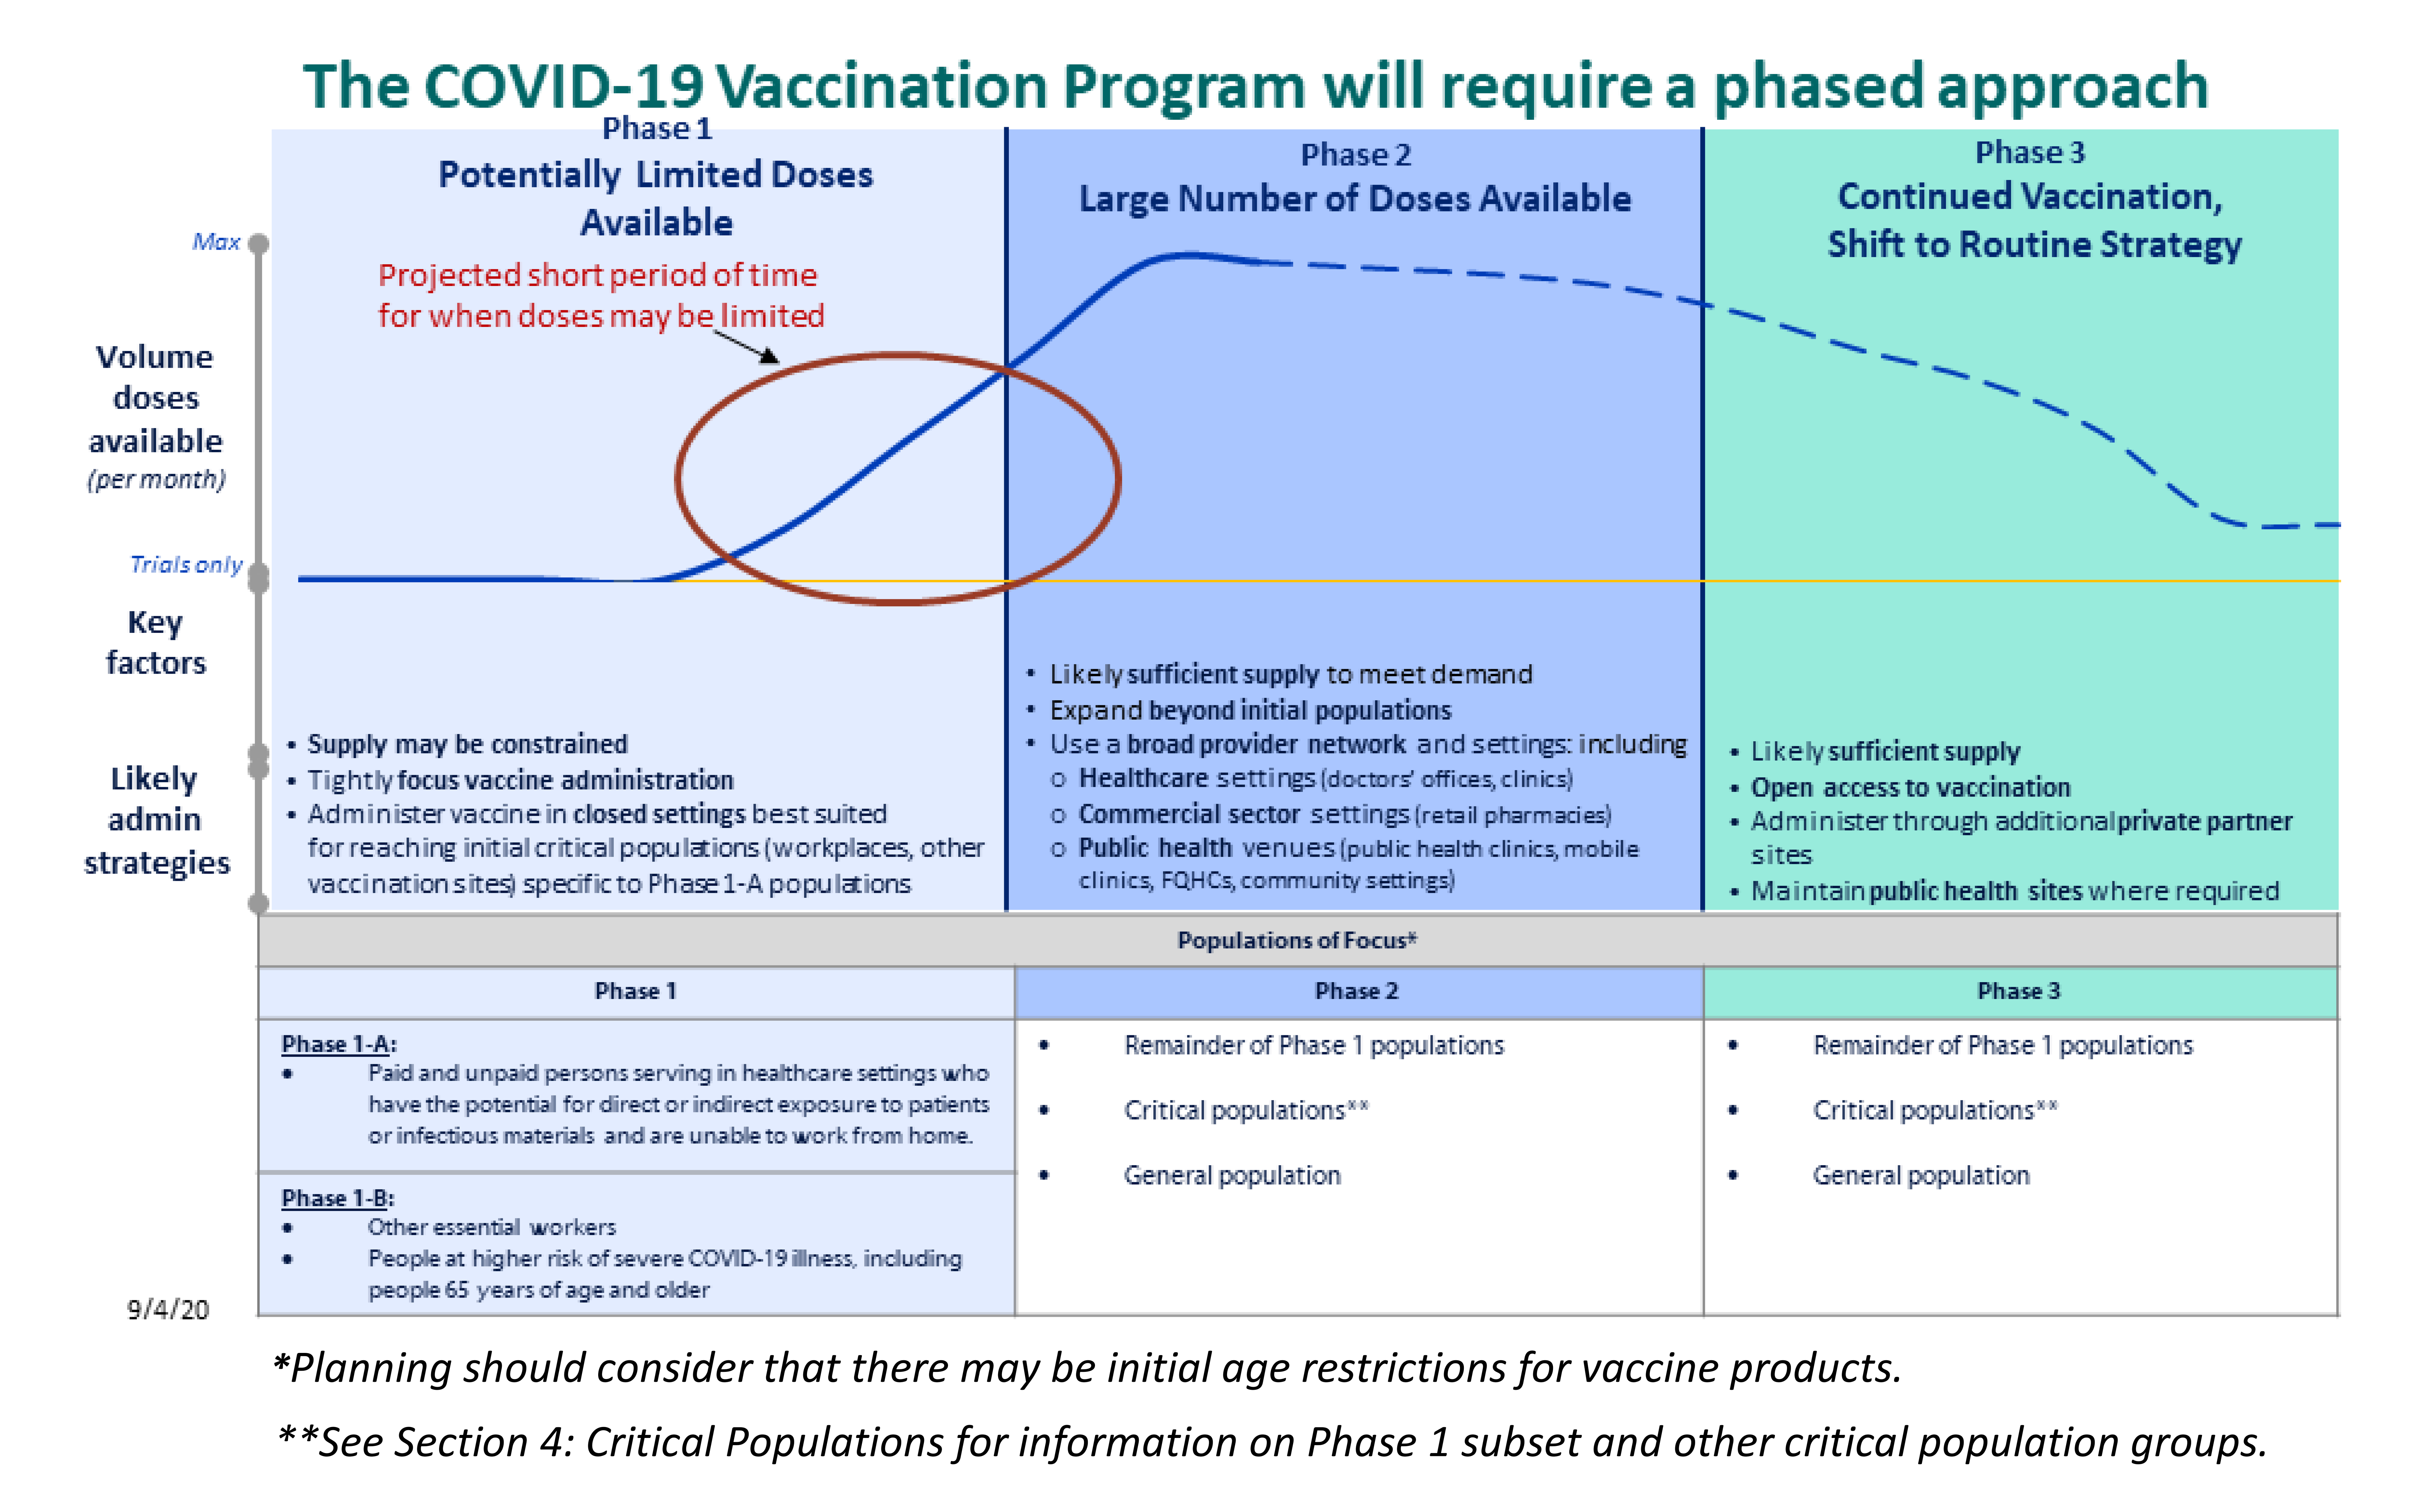 The COVID-19 Vaccination Program will require a phased approach